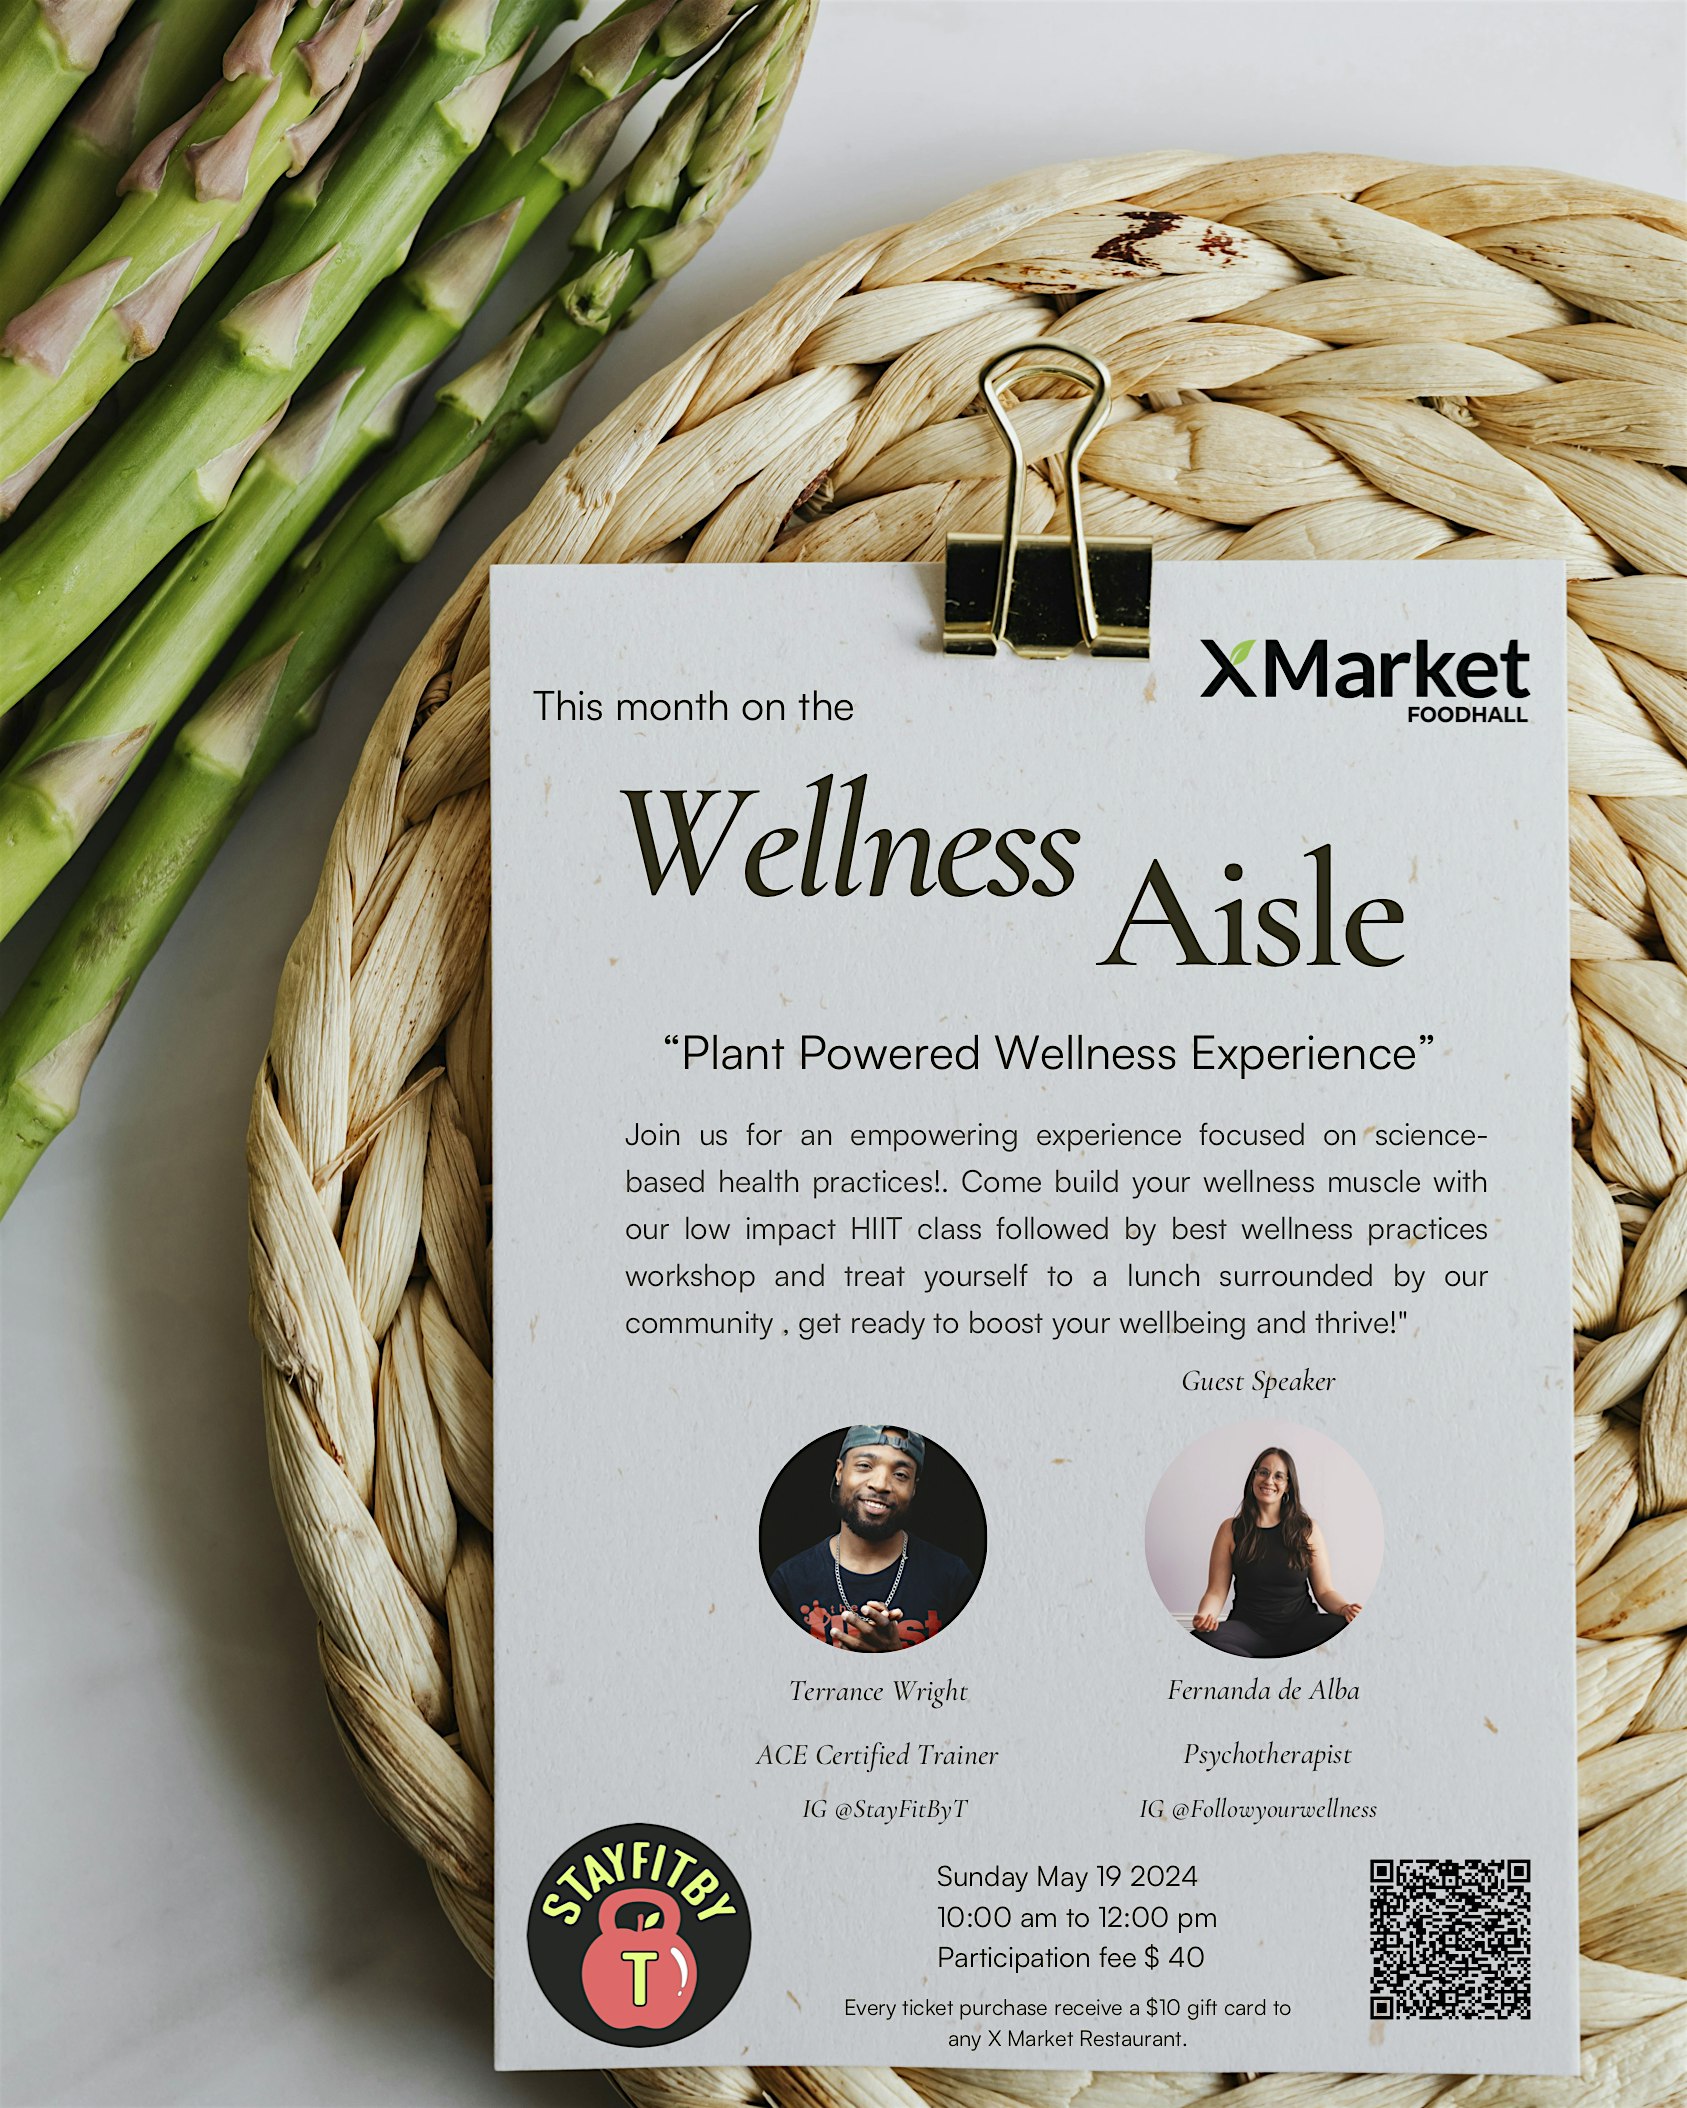 Plant Powered Wellness Experience